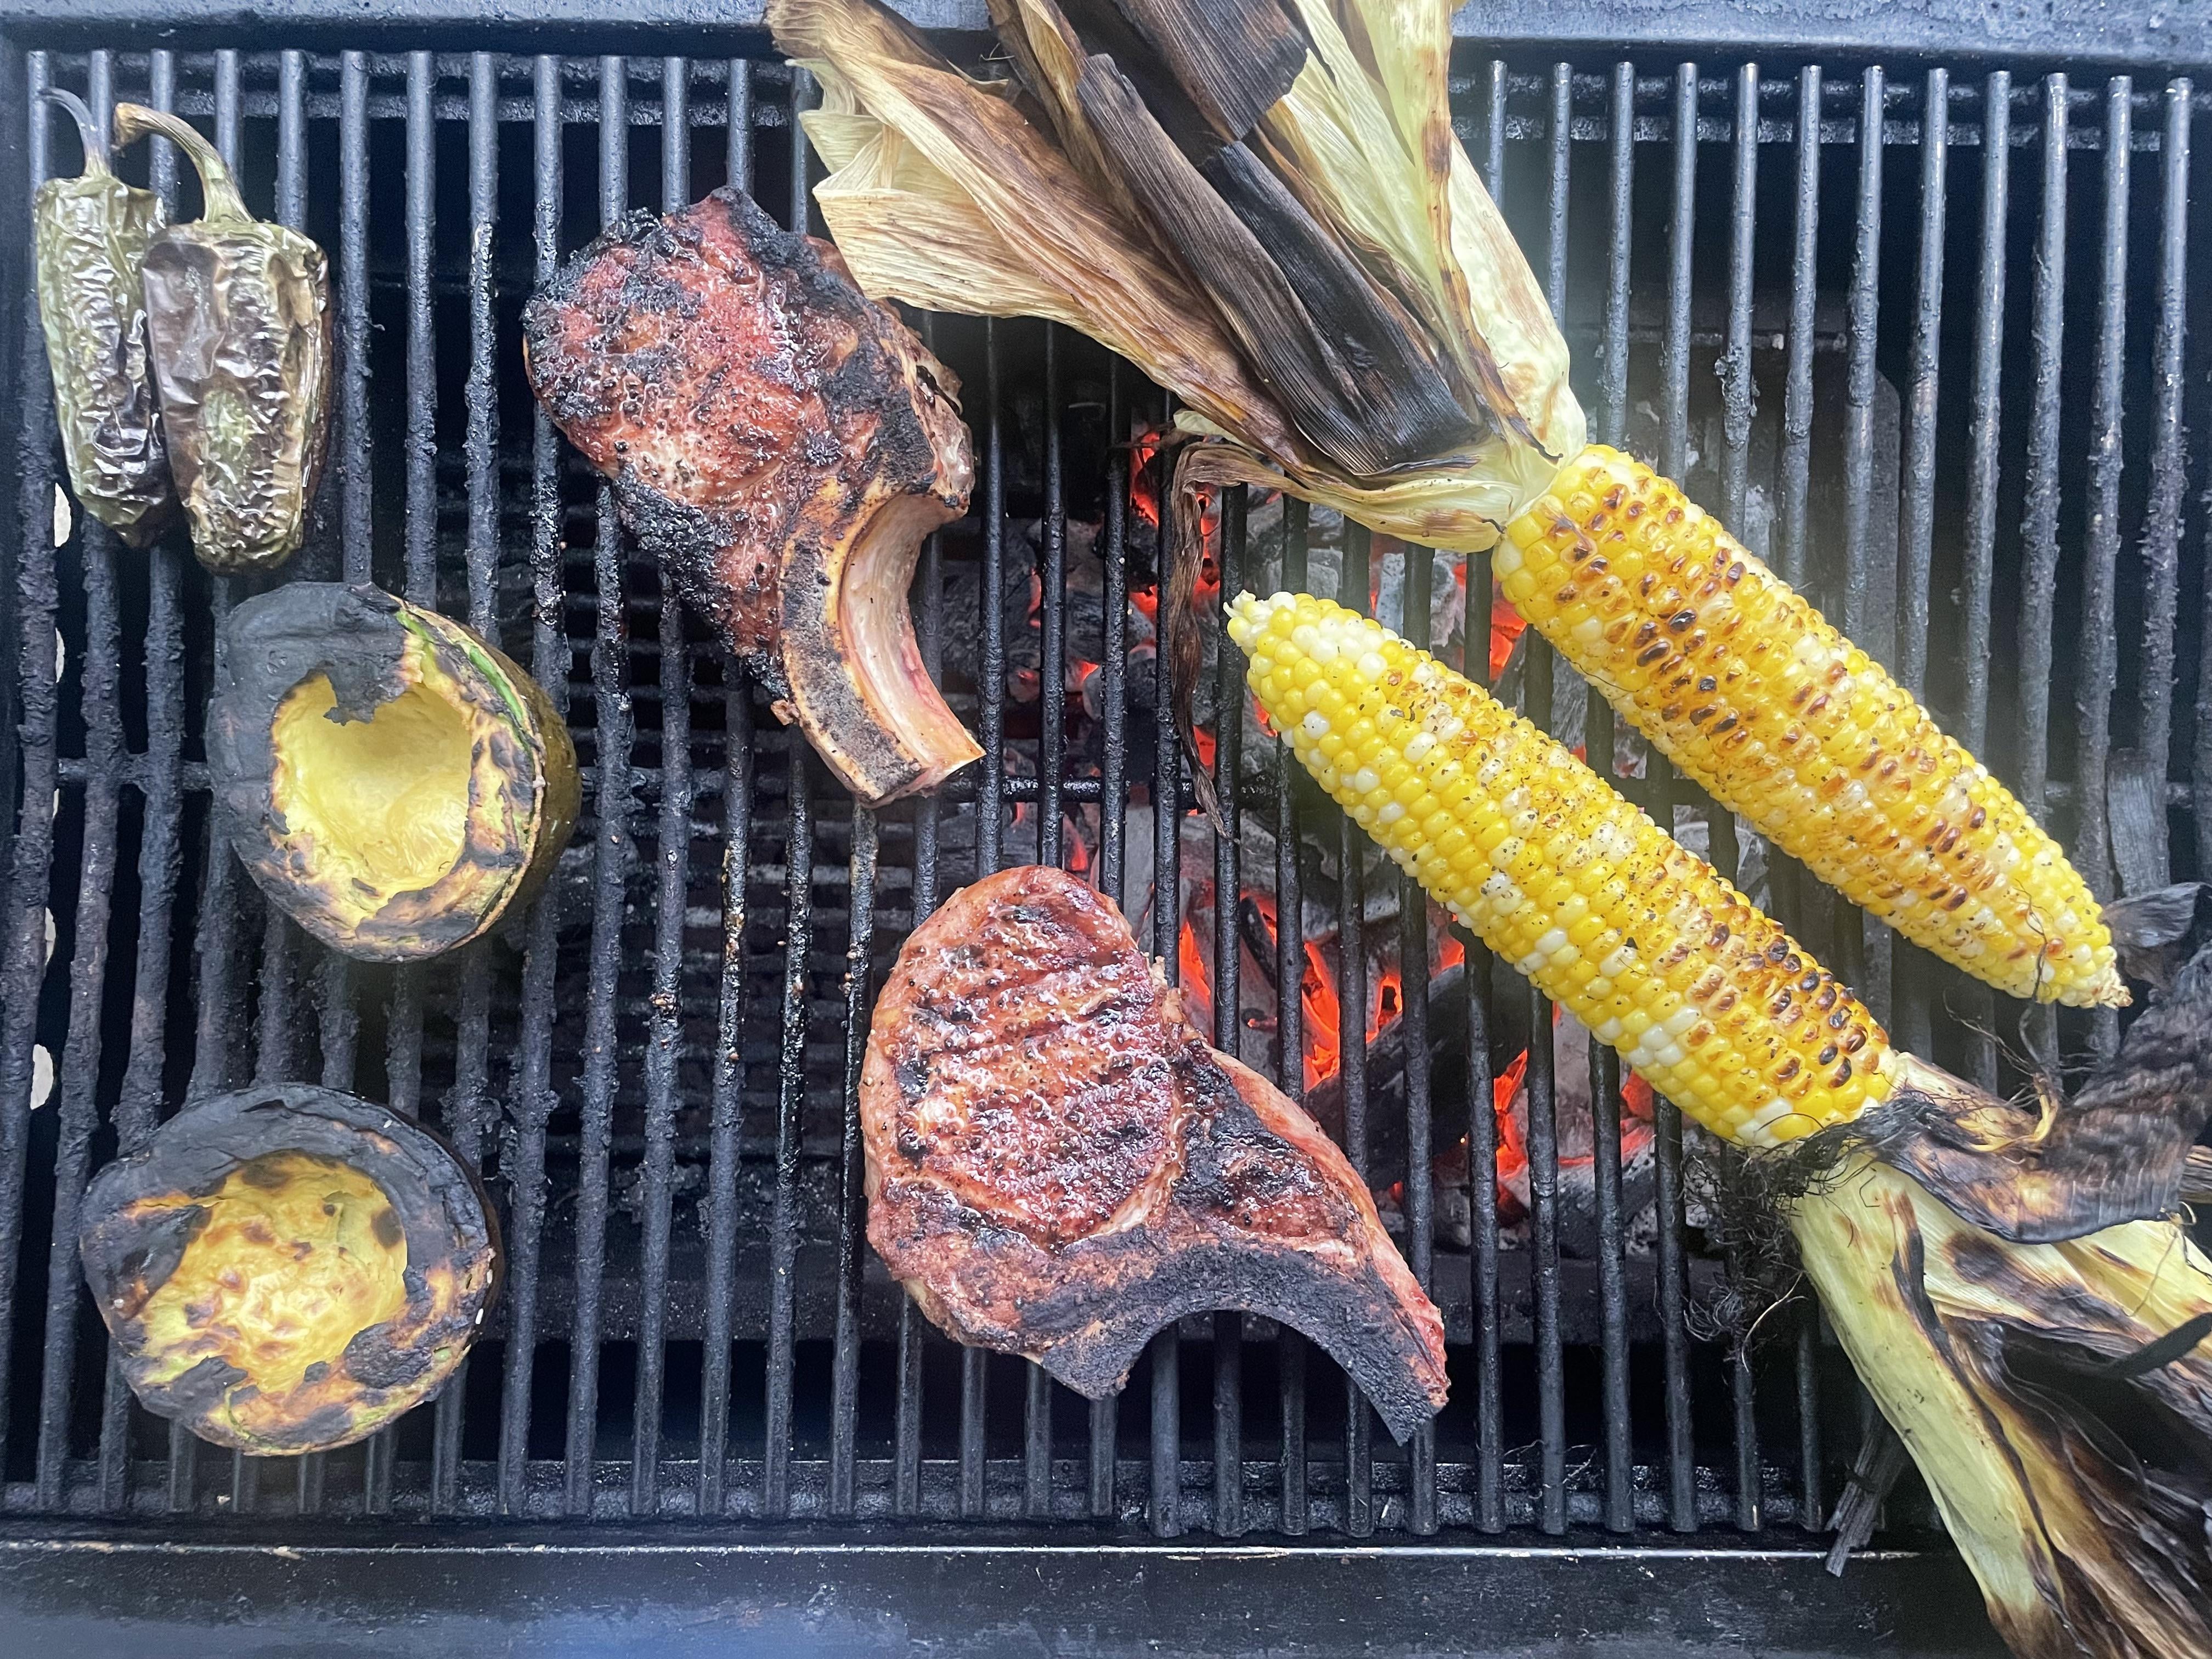 Fired up the Grill Tonight. Corn, Avocado, Jalapenos, Pork Chops. All ...